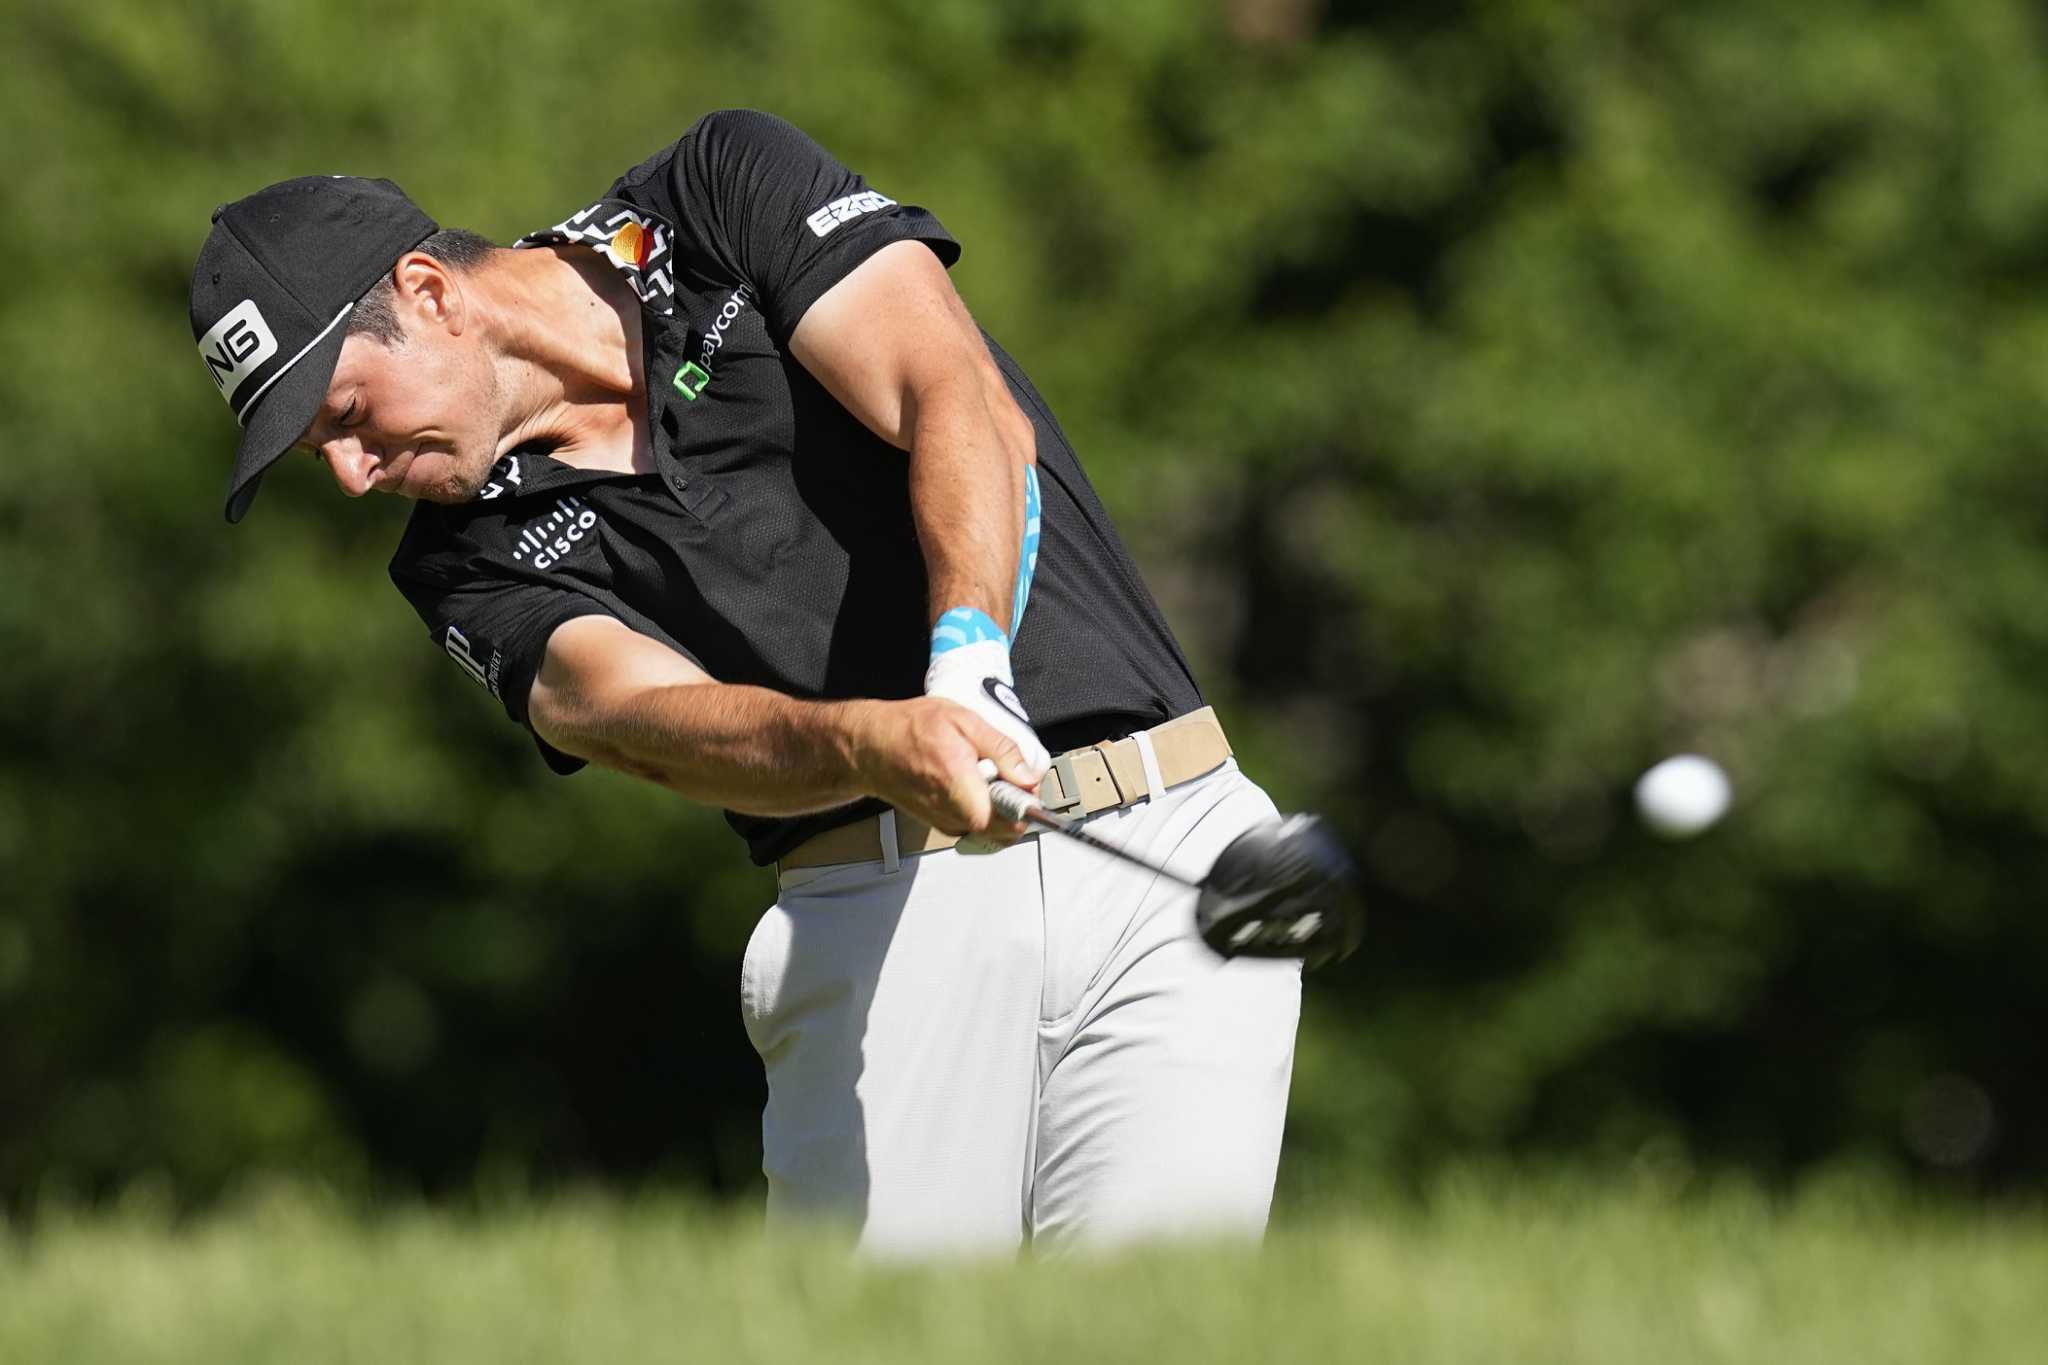 Viktor Hovland, Tommy Fleetwood join Travelers Championship field